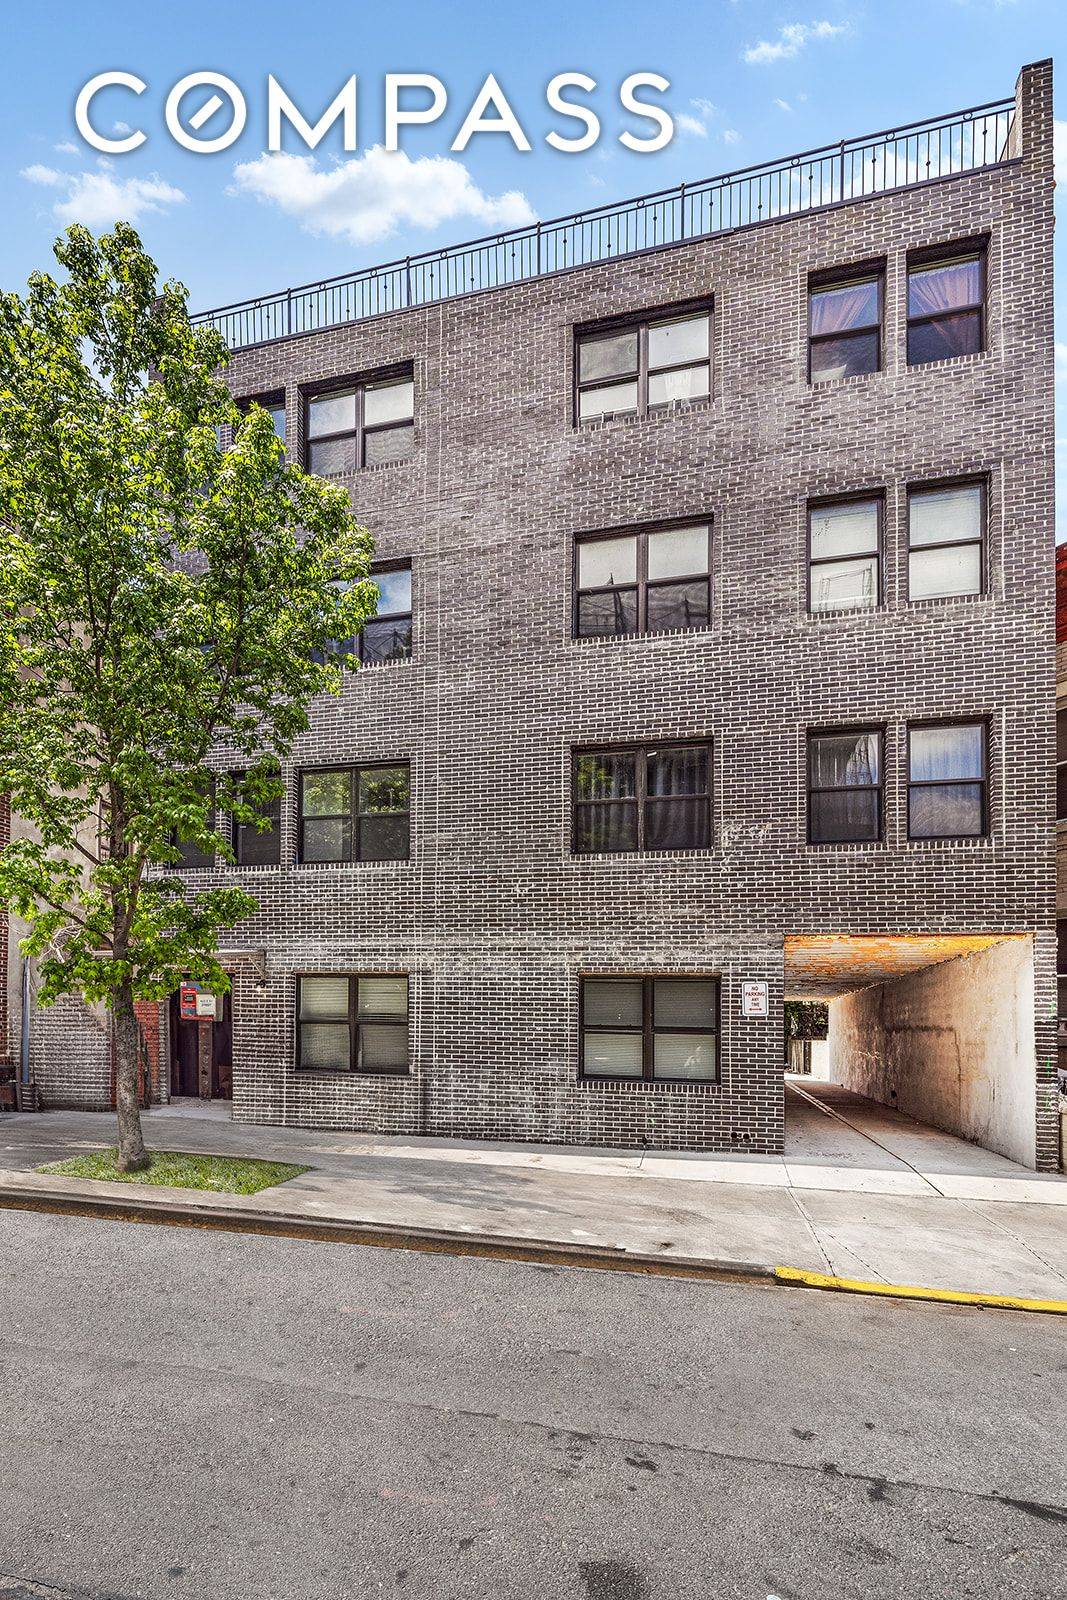 Welcome to 422 E 31 St, Brooklyn, a fantastic investment opportunity in the vibrant Flatbush neighborhood of Brooklyn !